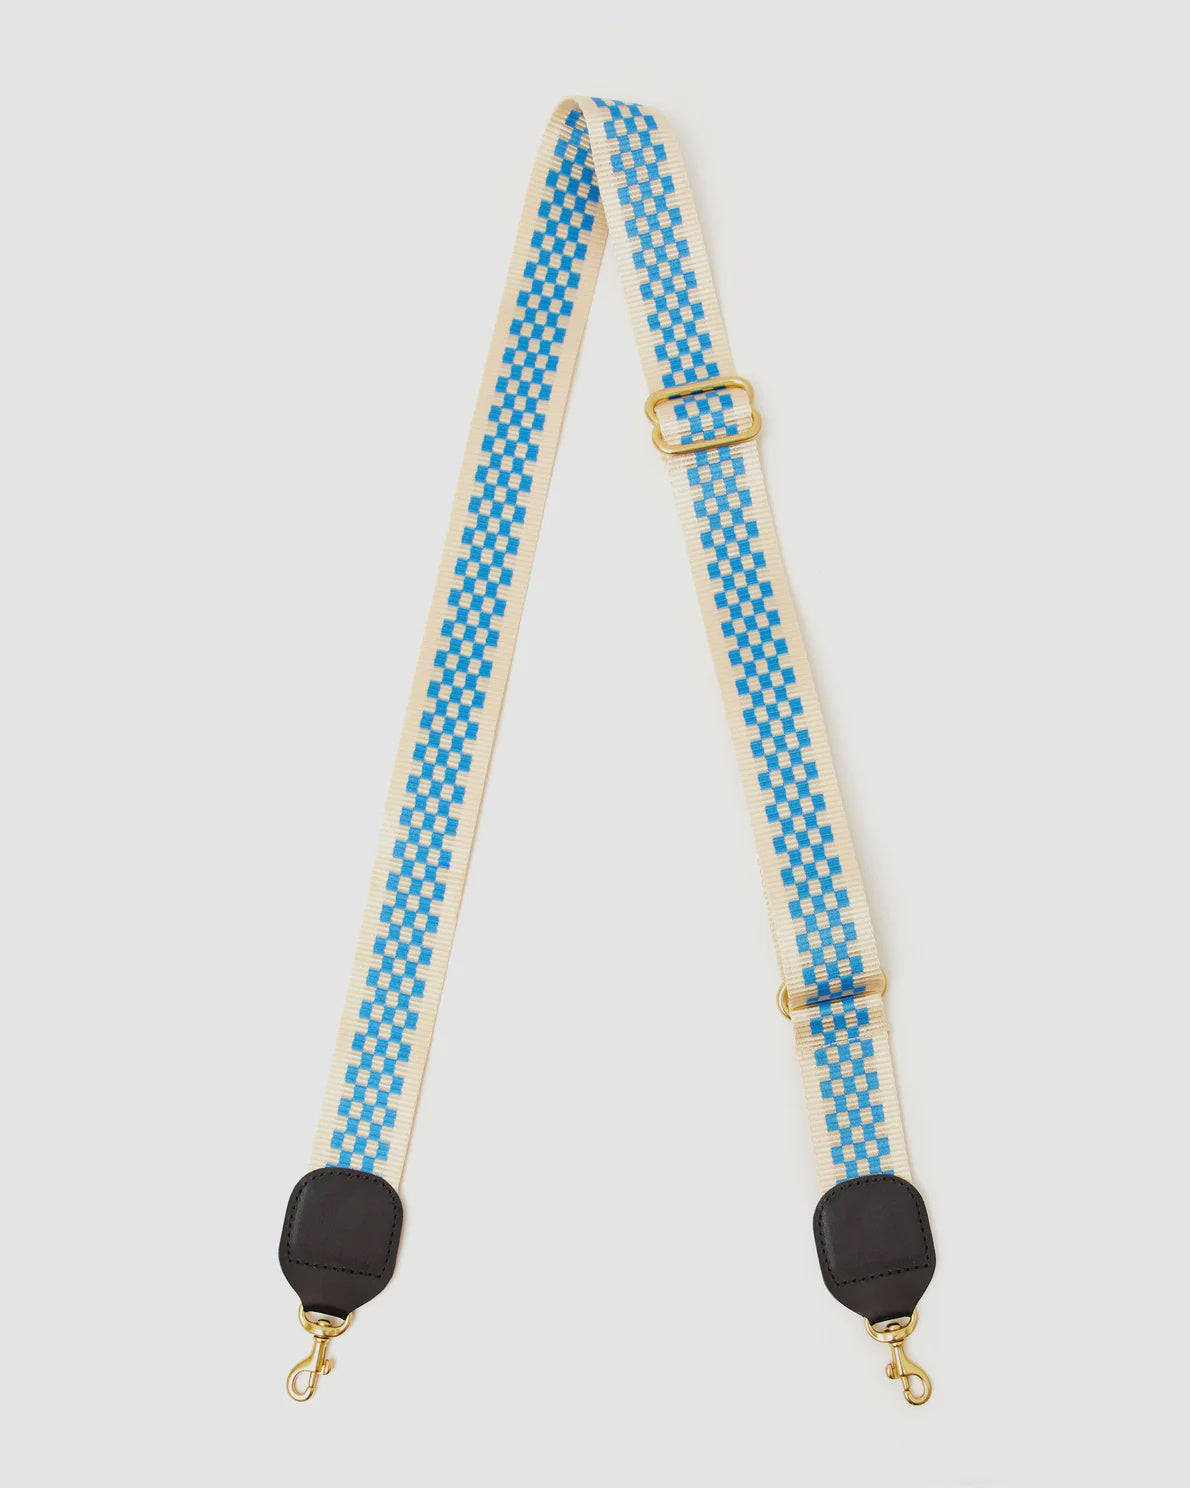 A Clare Vivier Crossbody Strap accessory with blue and beige checkered design, featuring gold hardware and black leather accents, isolated on a white background.